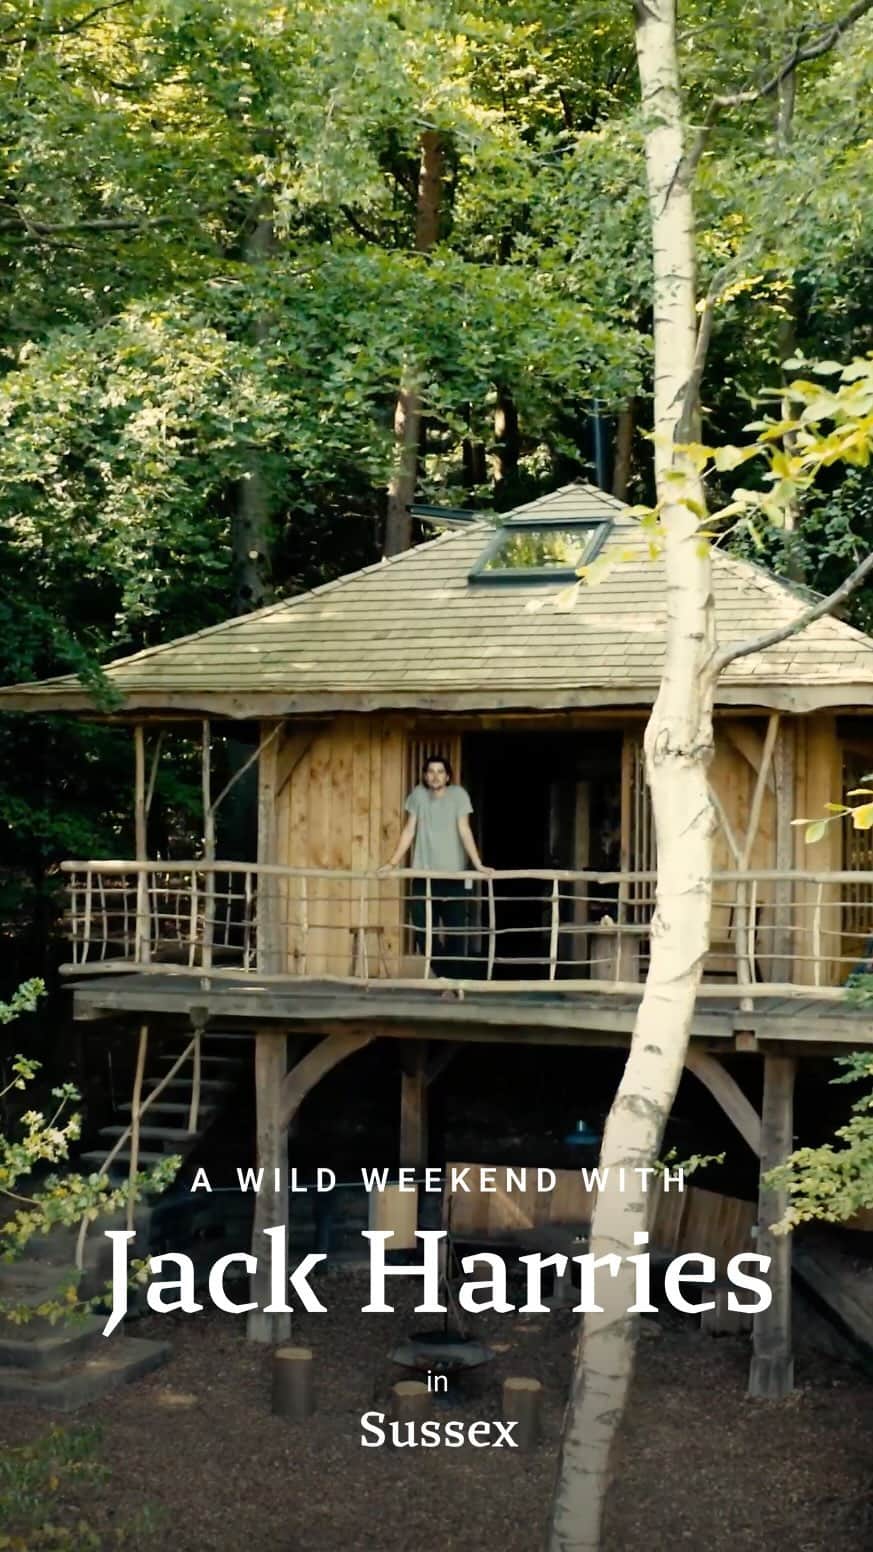 Jackson Harriesのインスタグラム：「For his second Wild Weekend, @jackharries is off to Sussex to meet the thriving community at the heart of a rewilding project and stay in one of the incredible handcrafted treehouses at Wilderness Wood.  Joining in is encouraged here, and Jack soon finds himself helping out around the site, trying quigong for the first time, and marvelling at the impact of taking a short break from nature, just a few hours’ train ride from London.  To discover more of Sussex, from vineyards to cliff top walks, follow the link in our bio.」